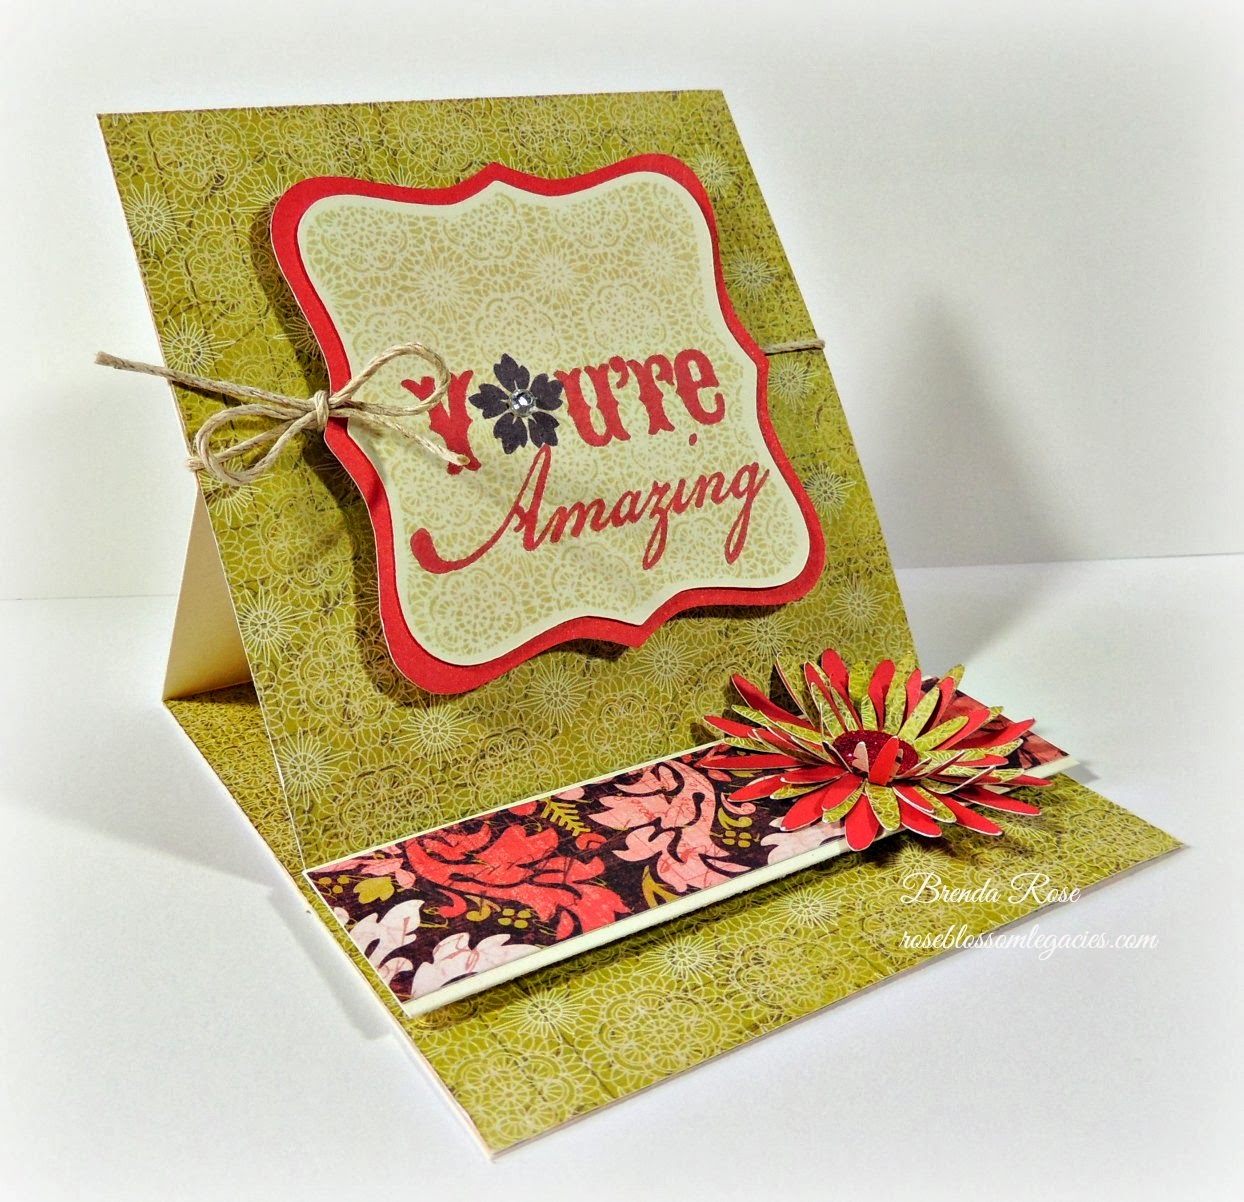 Rose Blossom Legacies: March Uniquely Folded Kit - Card #2